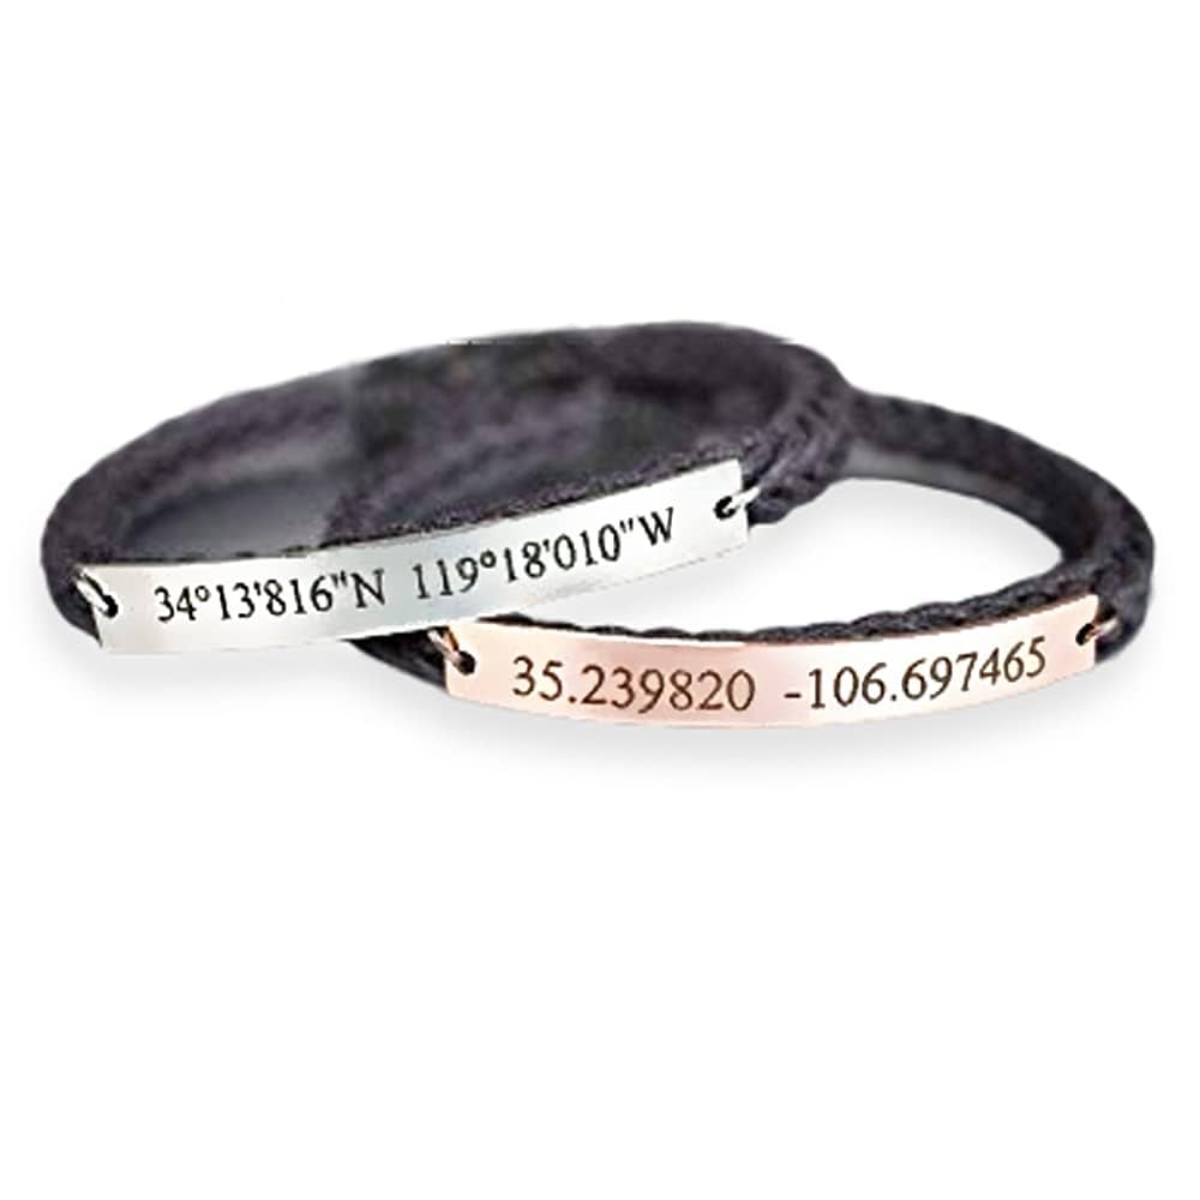 10. Custom Coordinates Bracelet: A Unique and Personalized Anniversary Gift